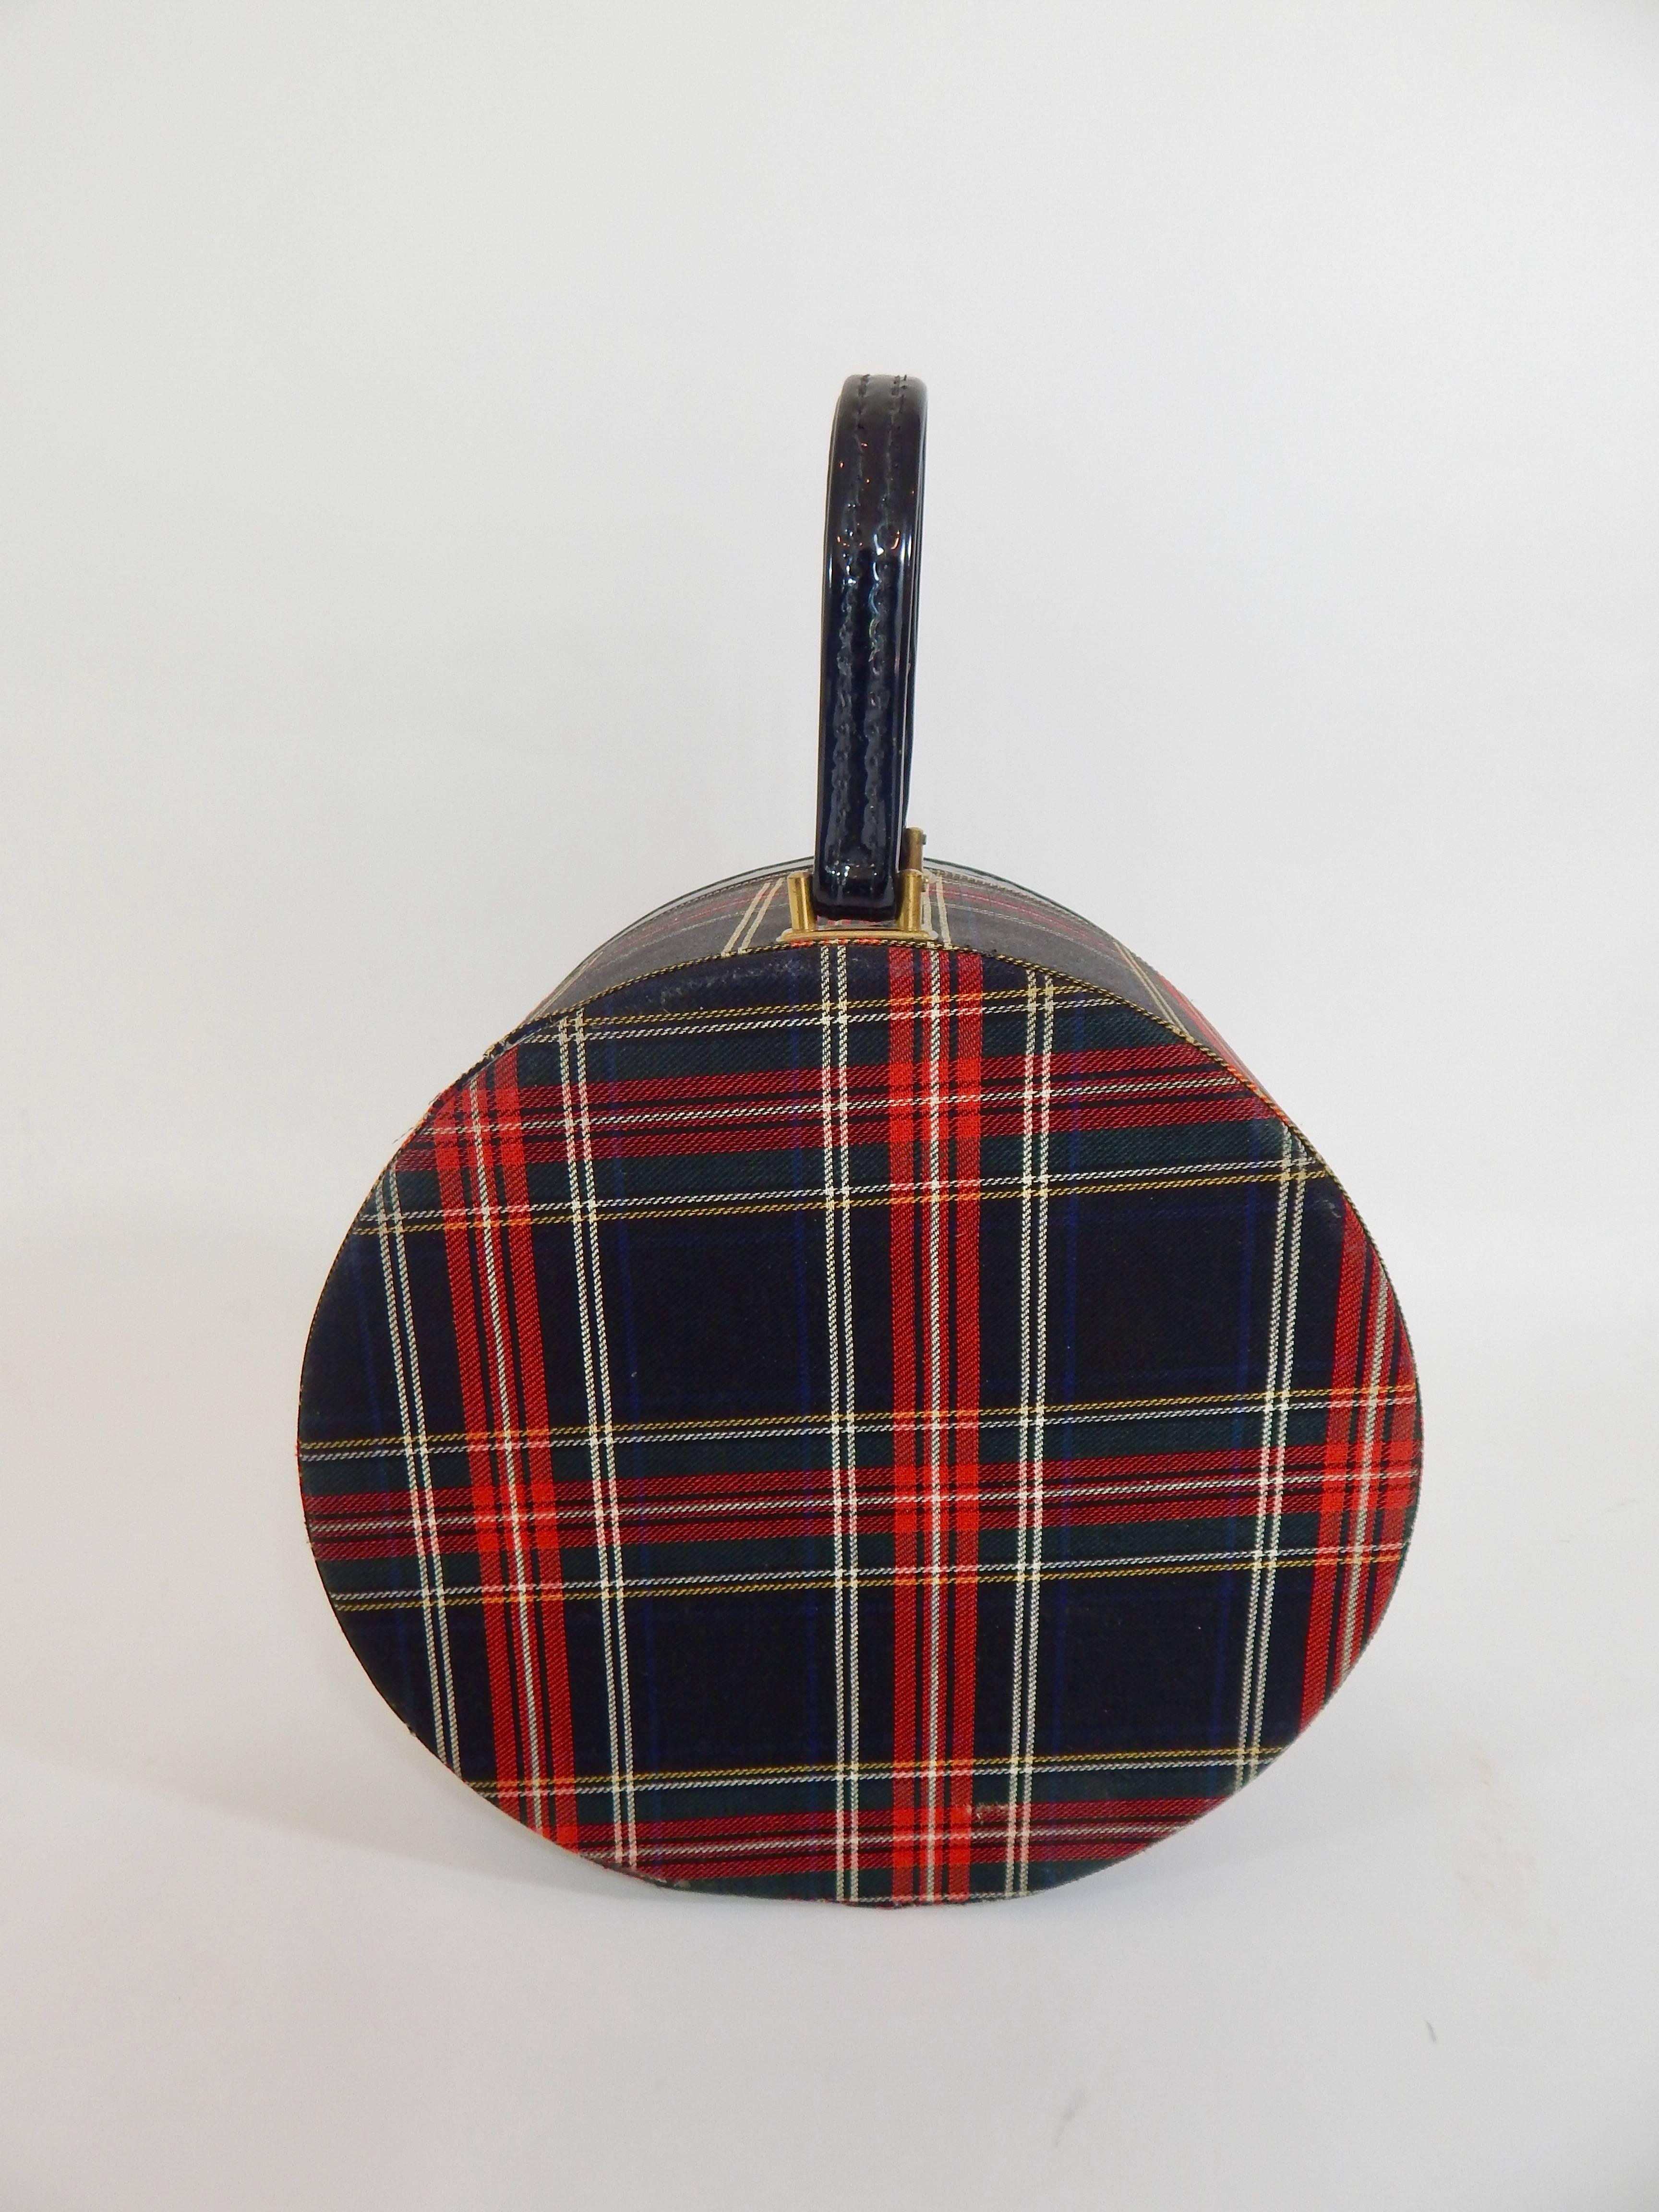 1950s Tartan Plaid Hat Box or Carrying Case. Black Patent Leather Trim and Handle. Excellent Condition. 